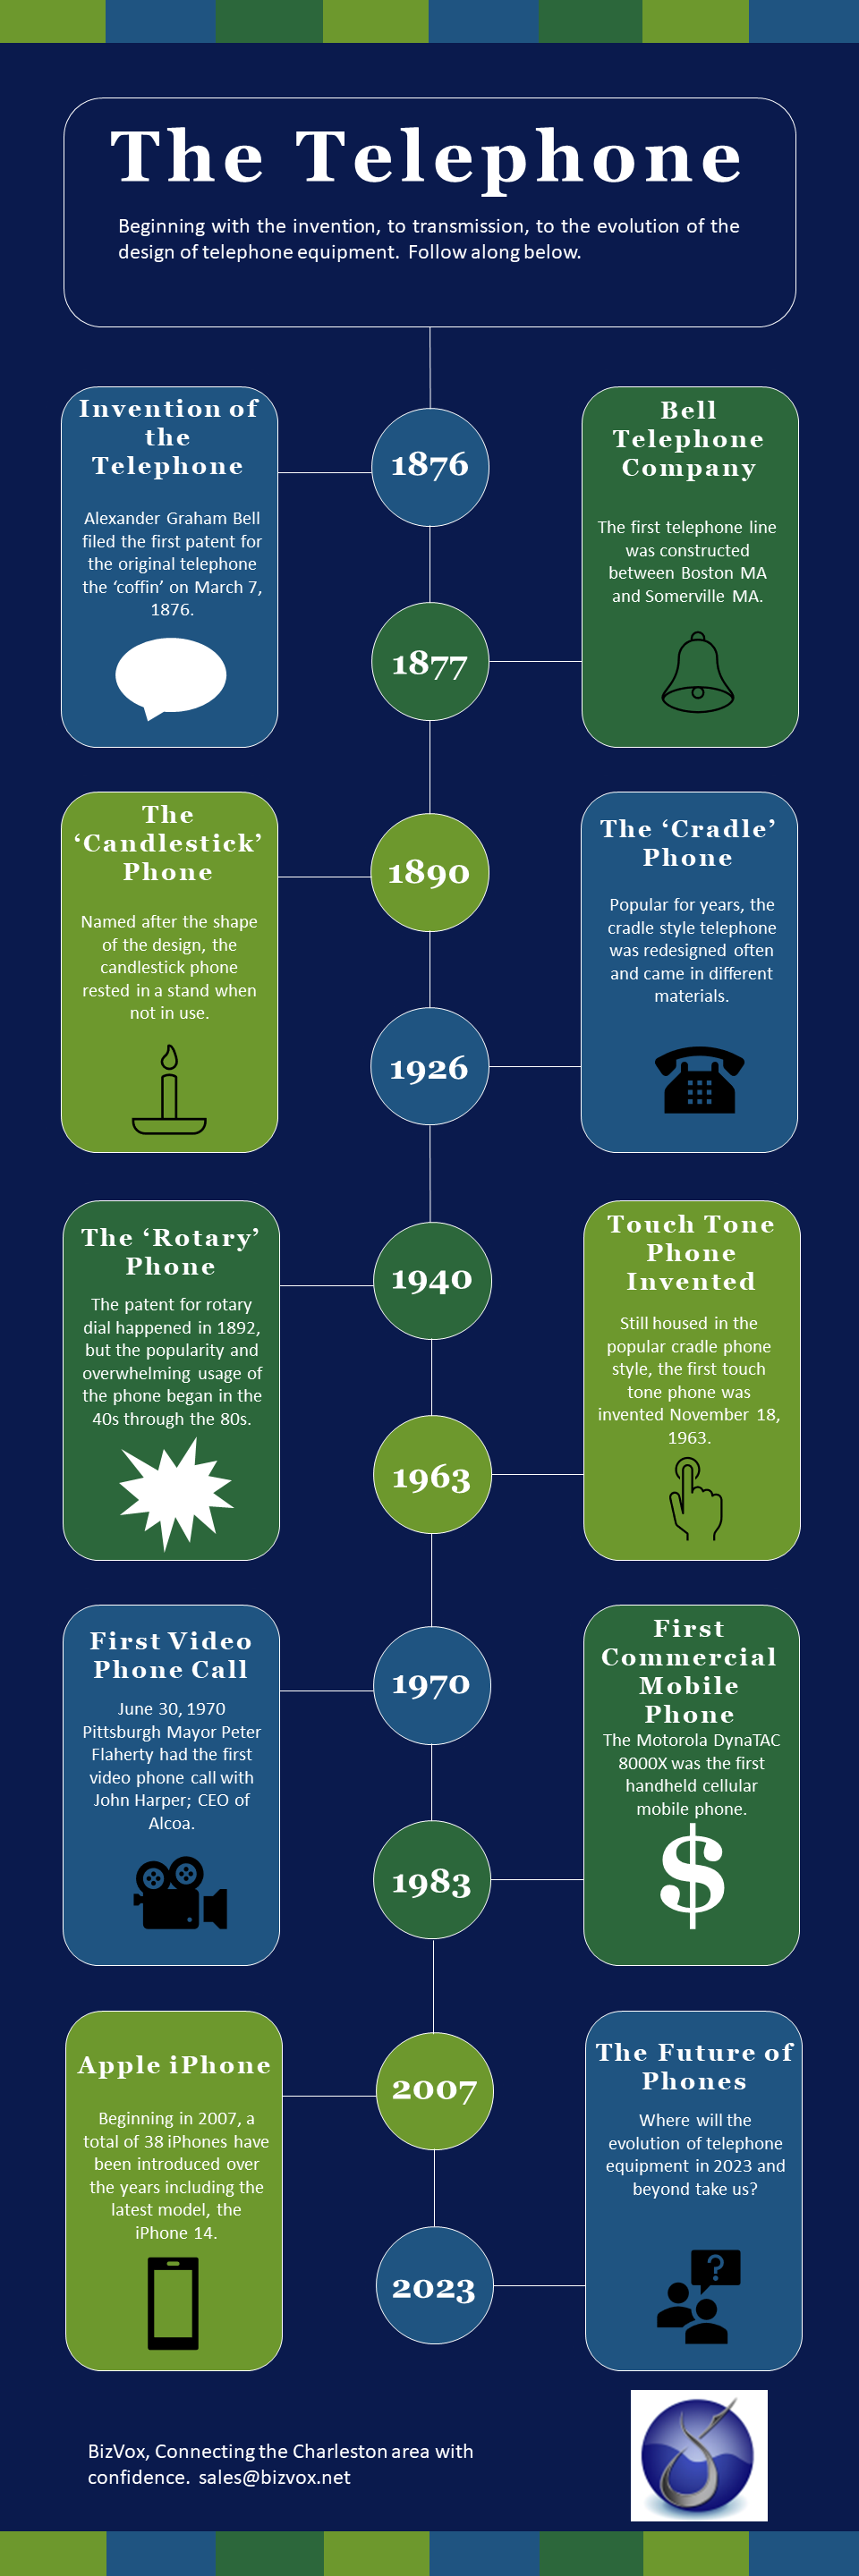 Telephone Equipment and Features Past Present Future